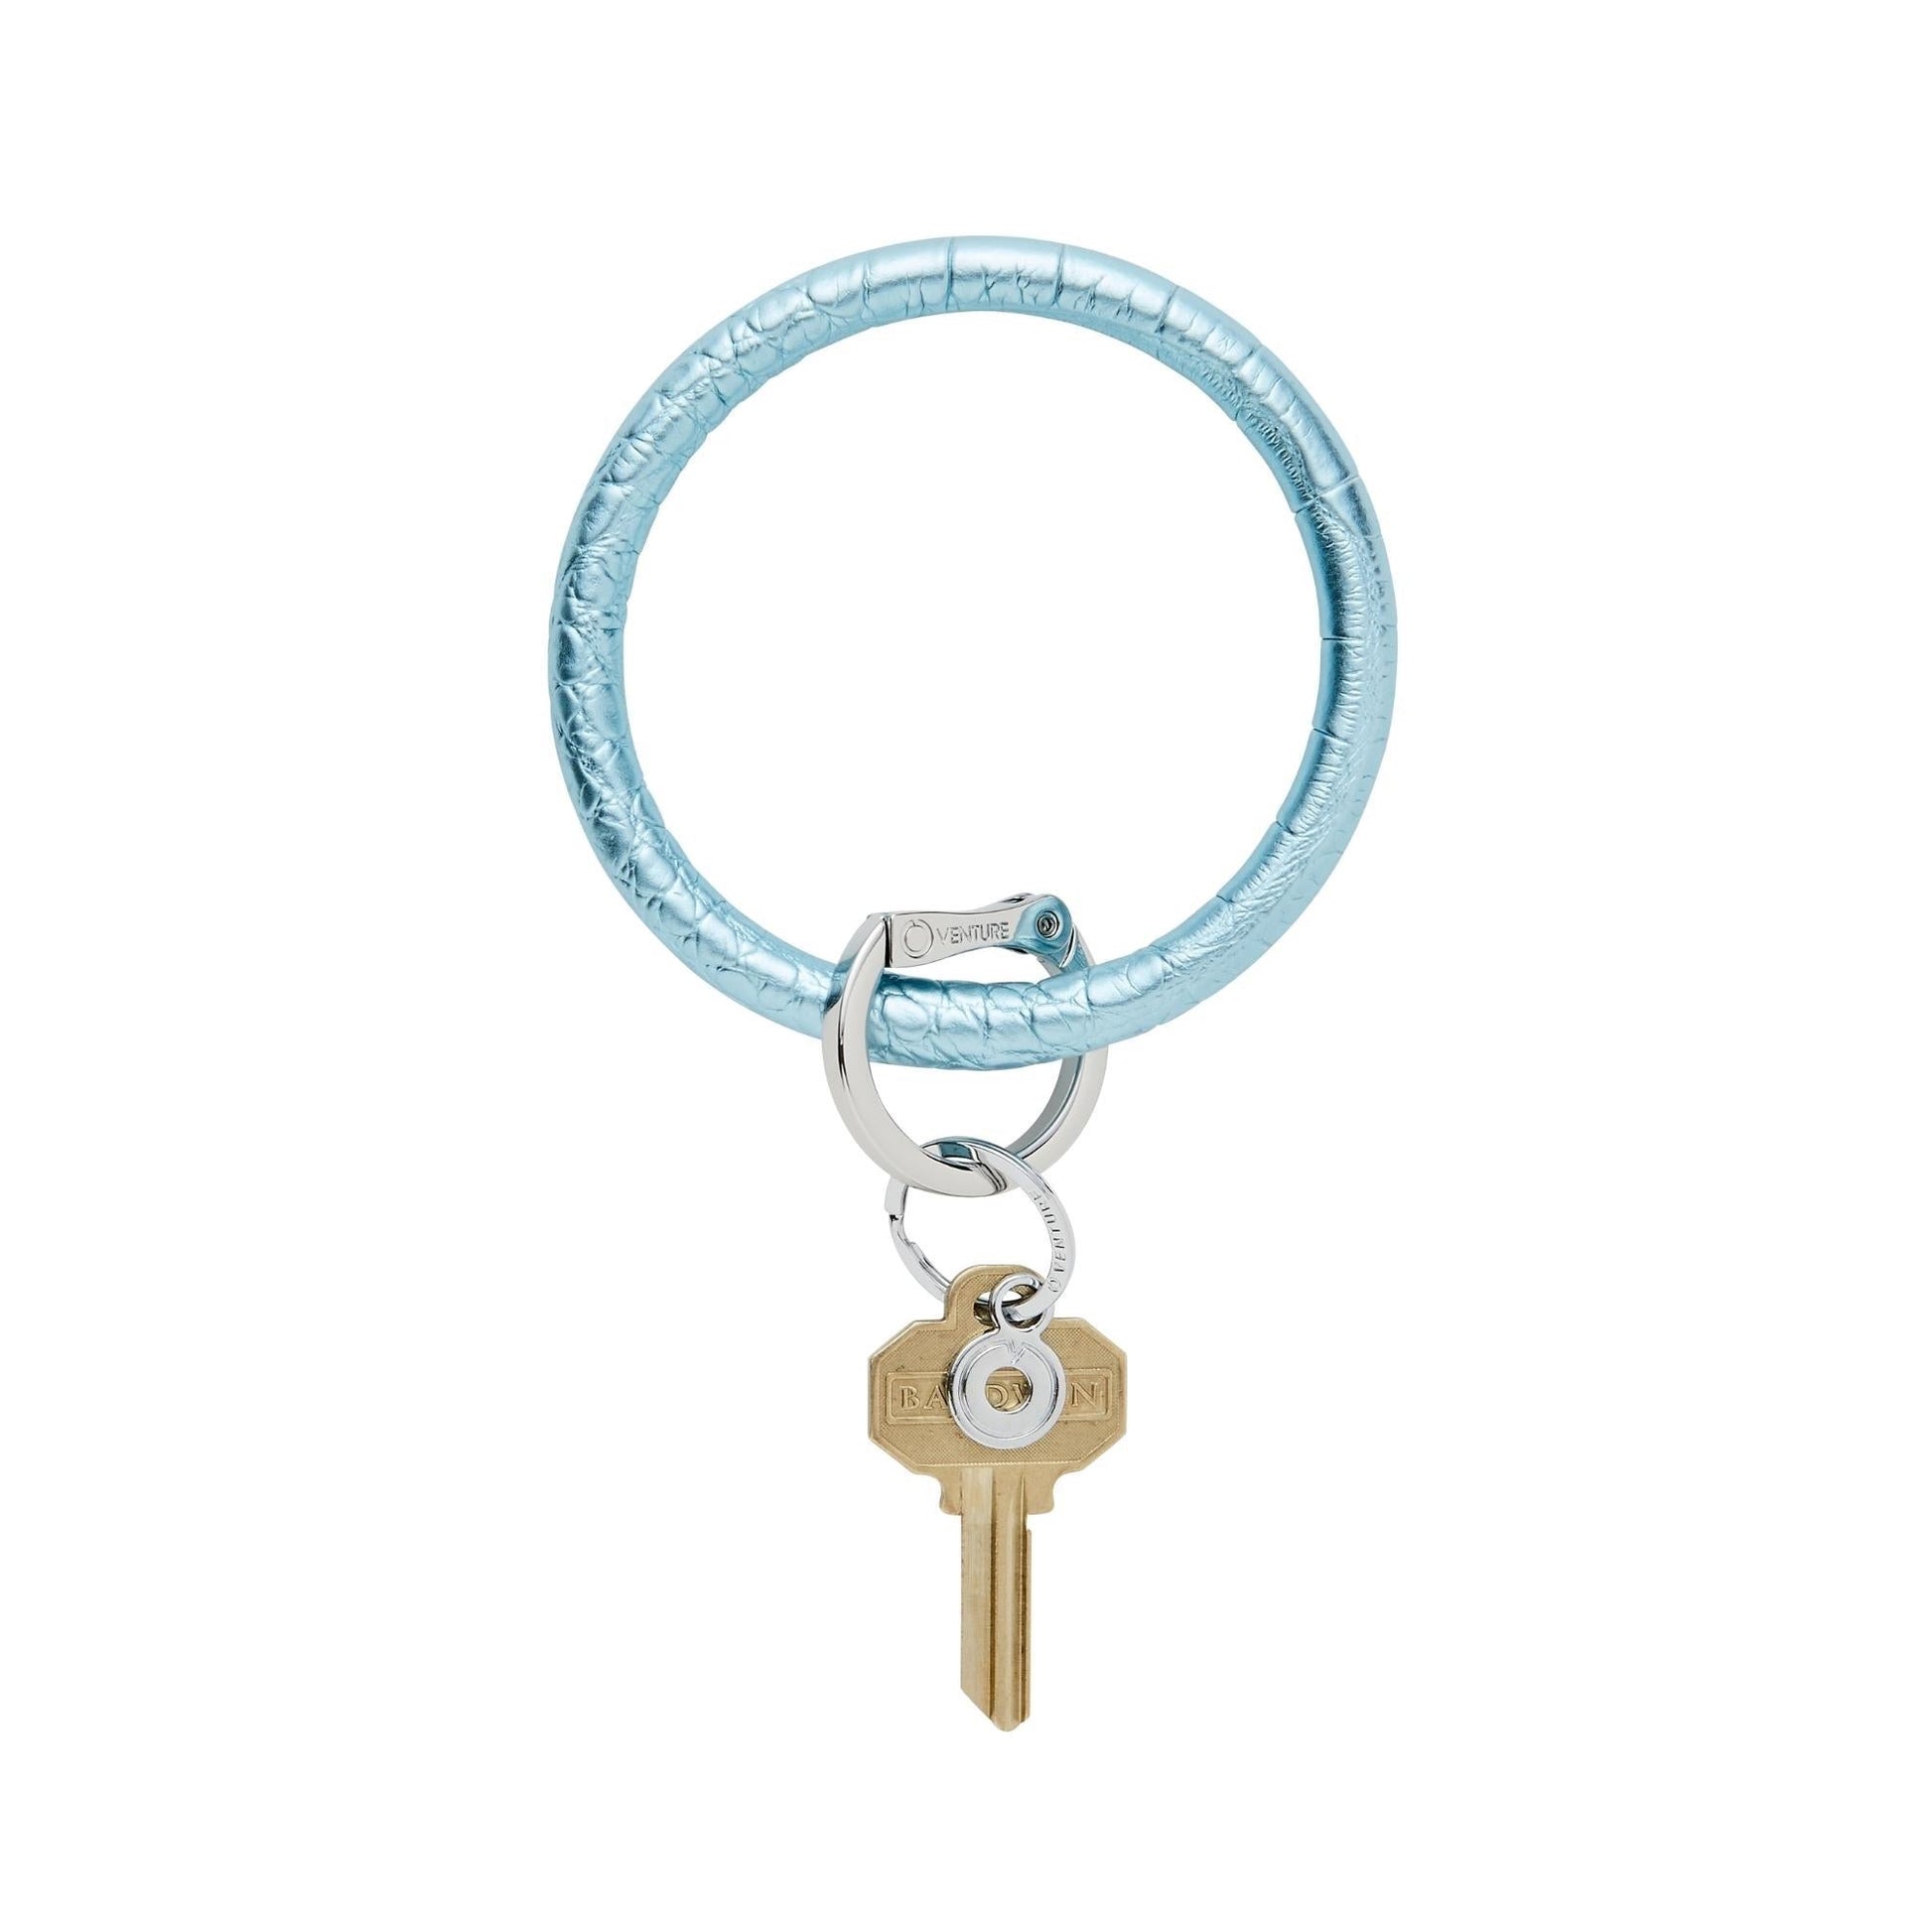 Metallic light blue croc embossed leather big o key rings with silver locking clasp